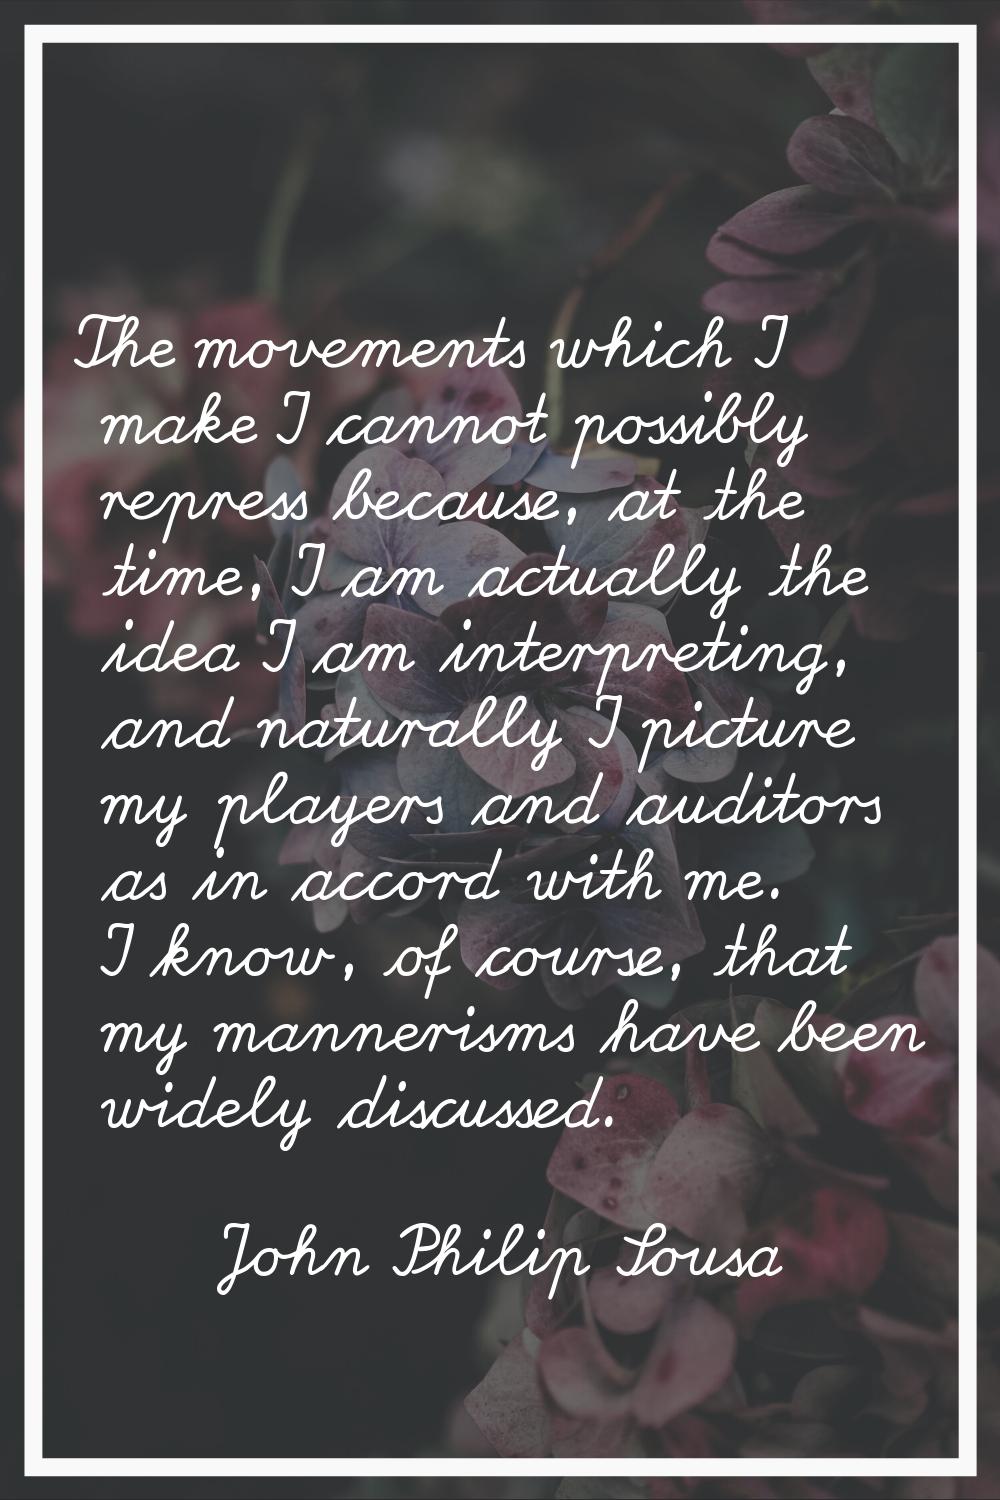 The movements which I make I cannot possibly repress because, at the time, I am actually the idea I